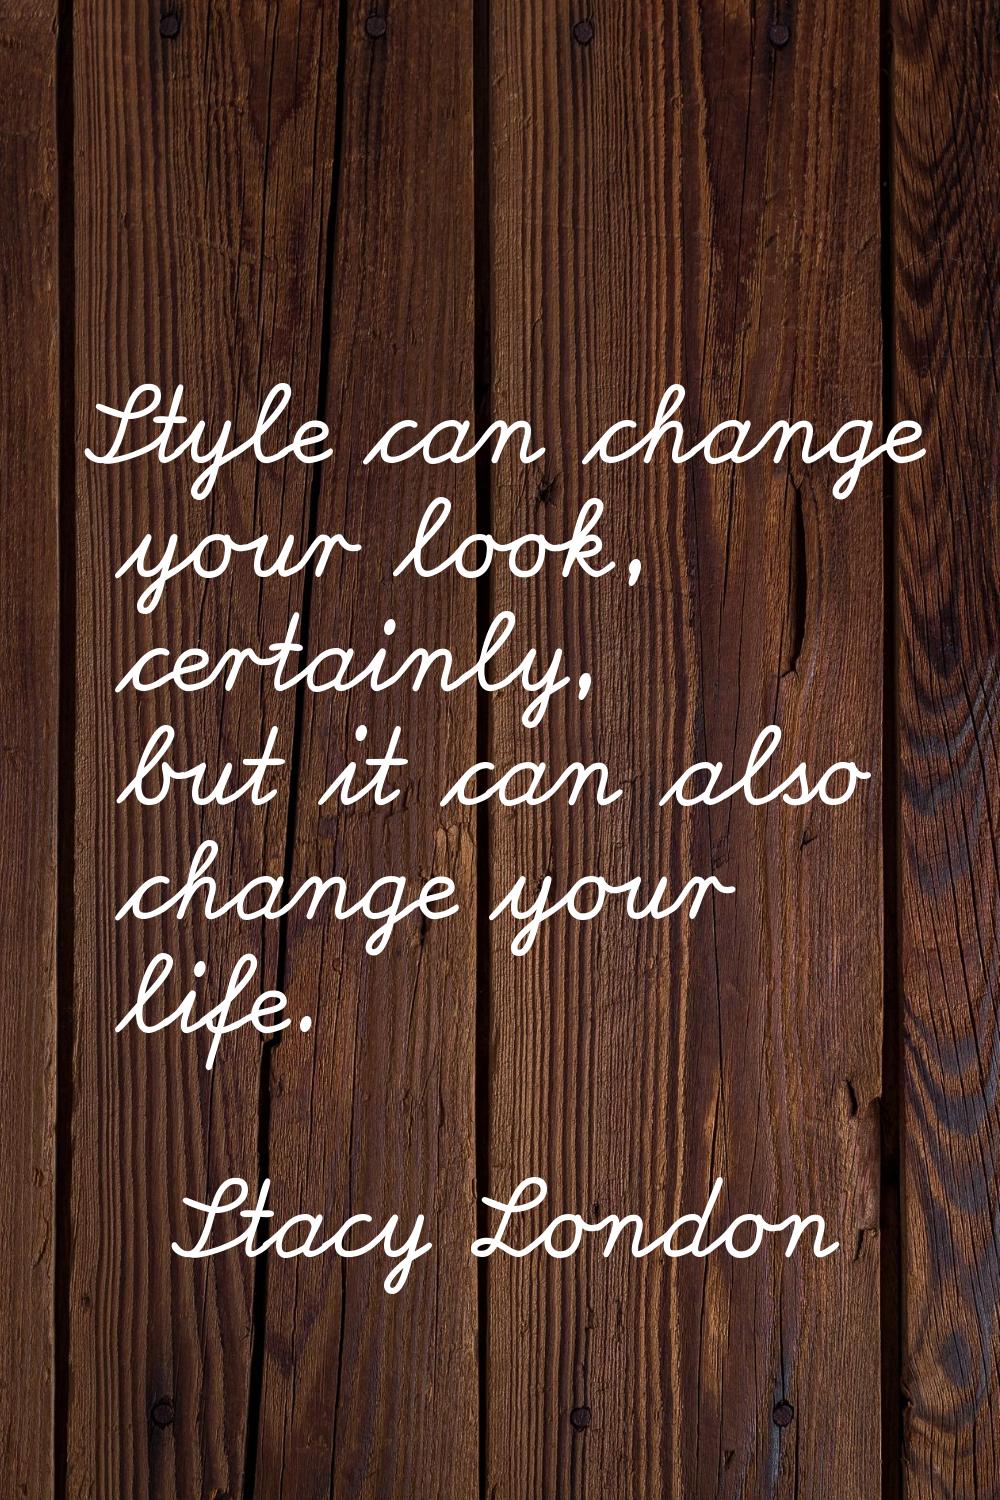 Style can change your look, certainly, but it can also change your life.